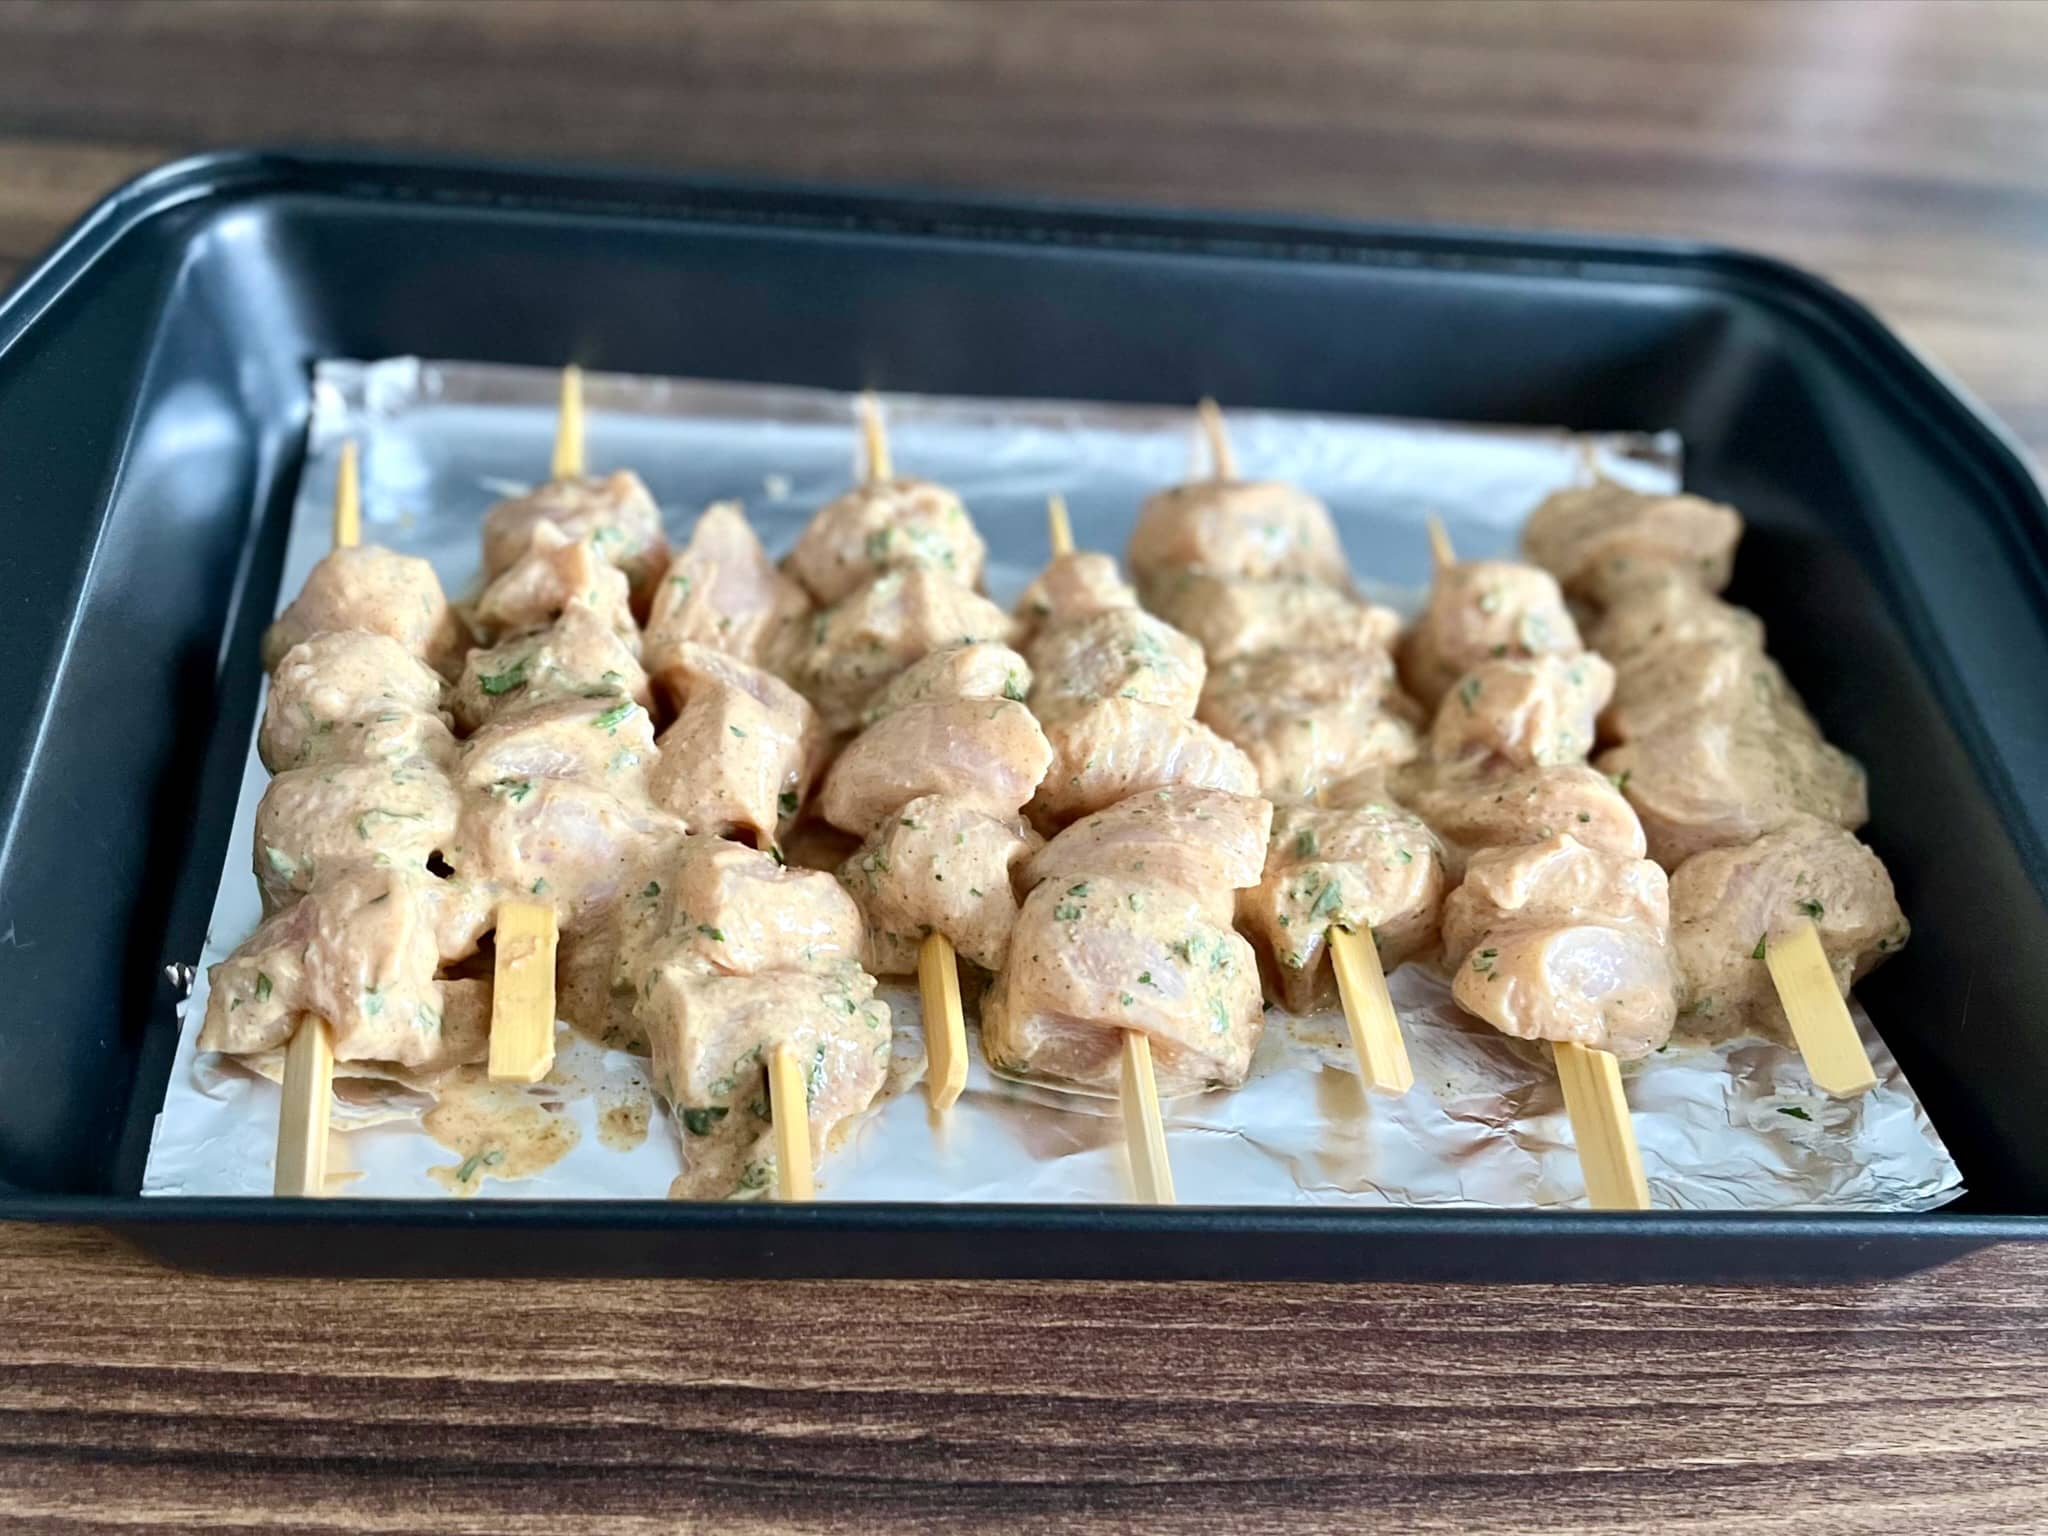 Chicken cubes threaded onto skewers, placed on in a baking tray lined with aluminium foil